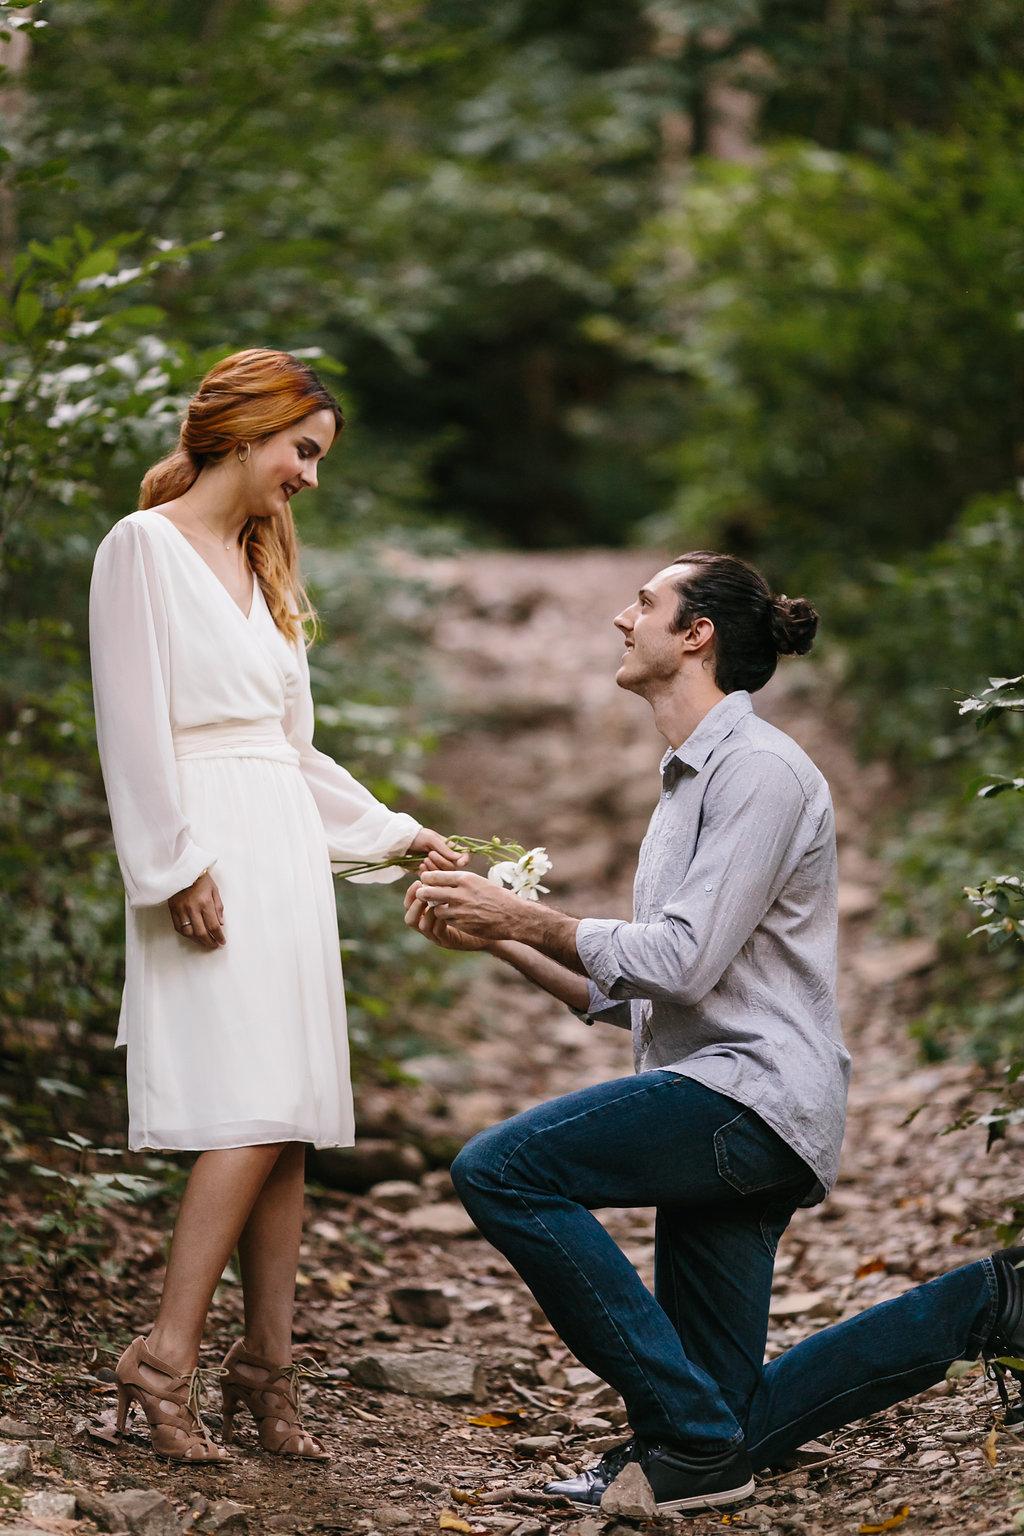 Rustic Styled Proposal in Wissahickon Valley Park L Priori Jewelry Proposal Philadelphia Wedding Ring Philly In Love Philadelphia Weddings